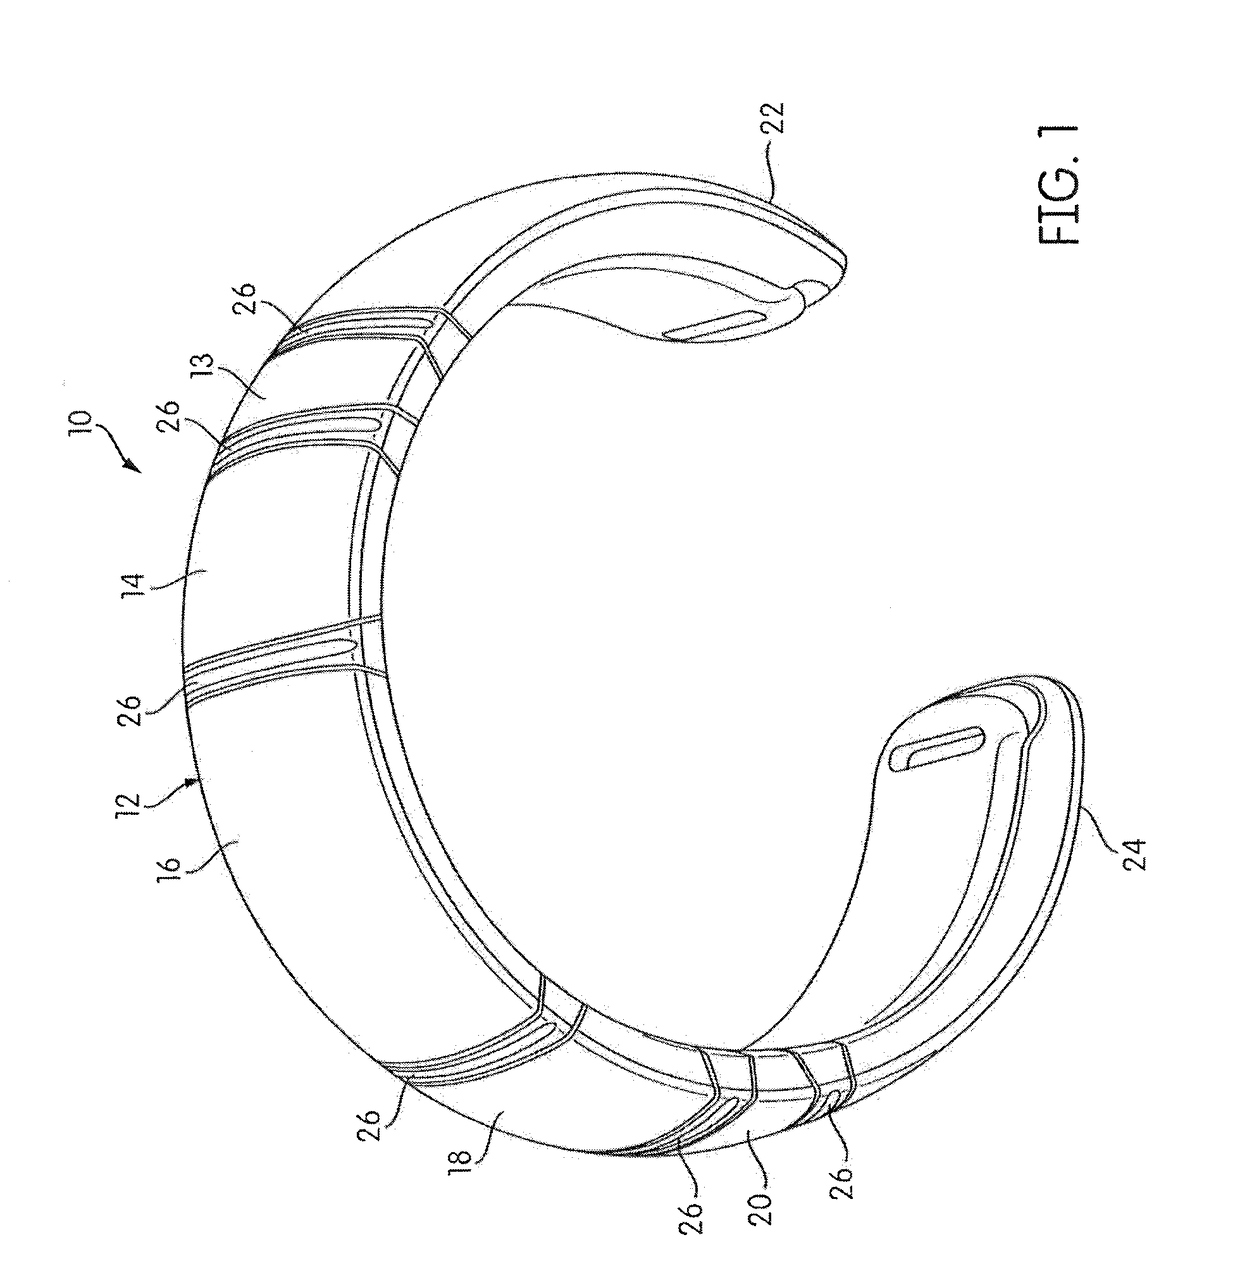 Functional, socially-enabled jewelry and systems for multi-device interaction